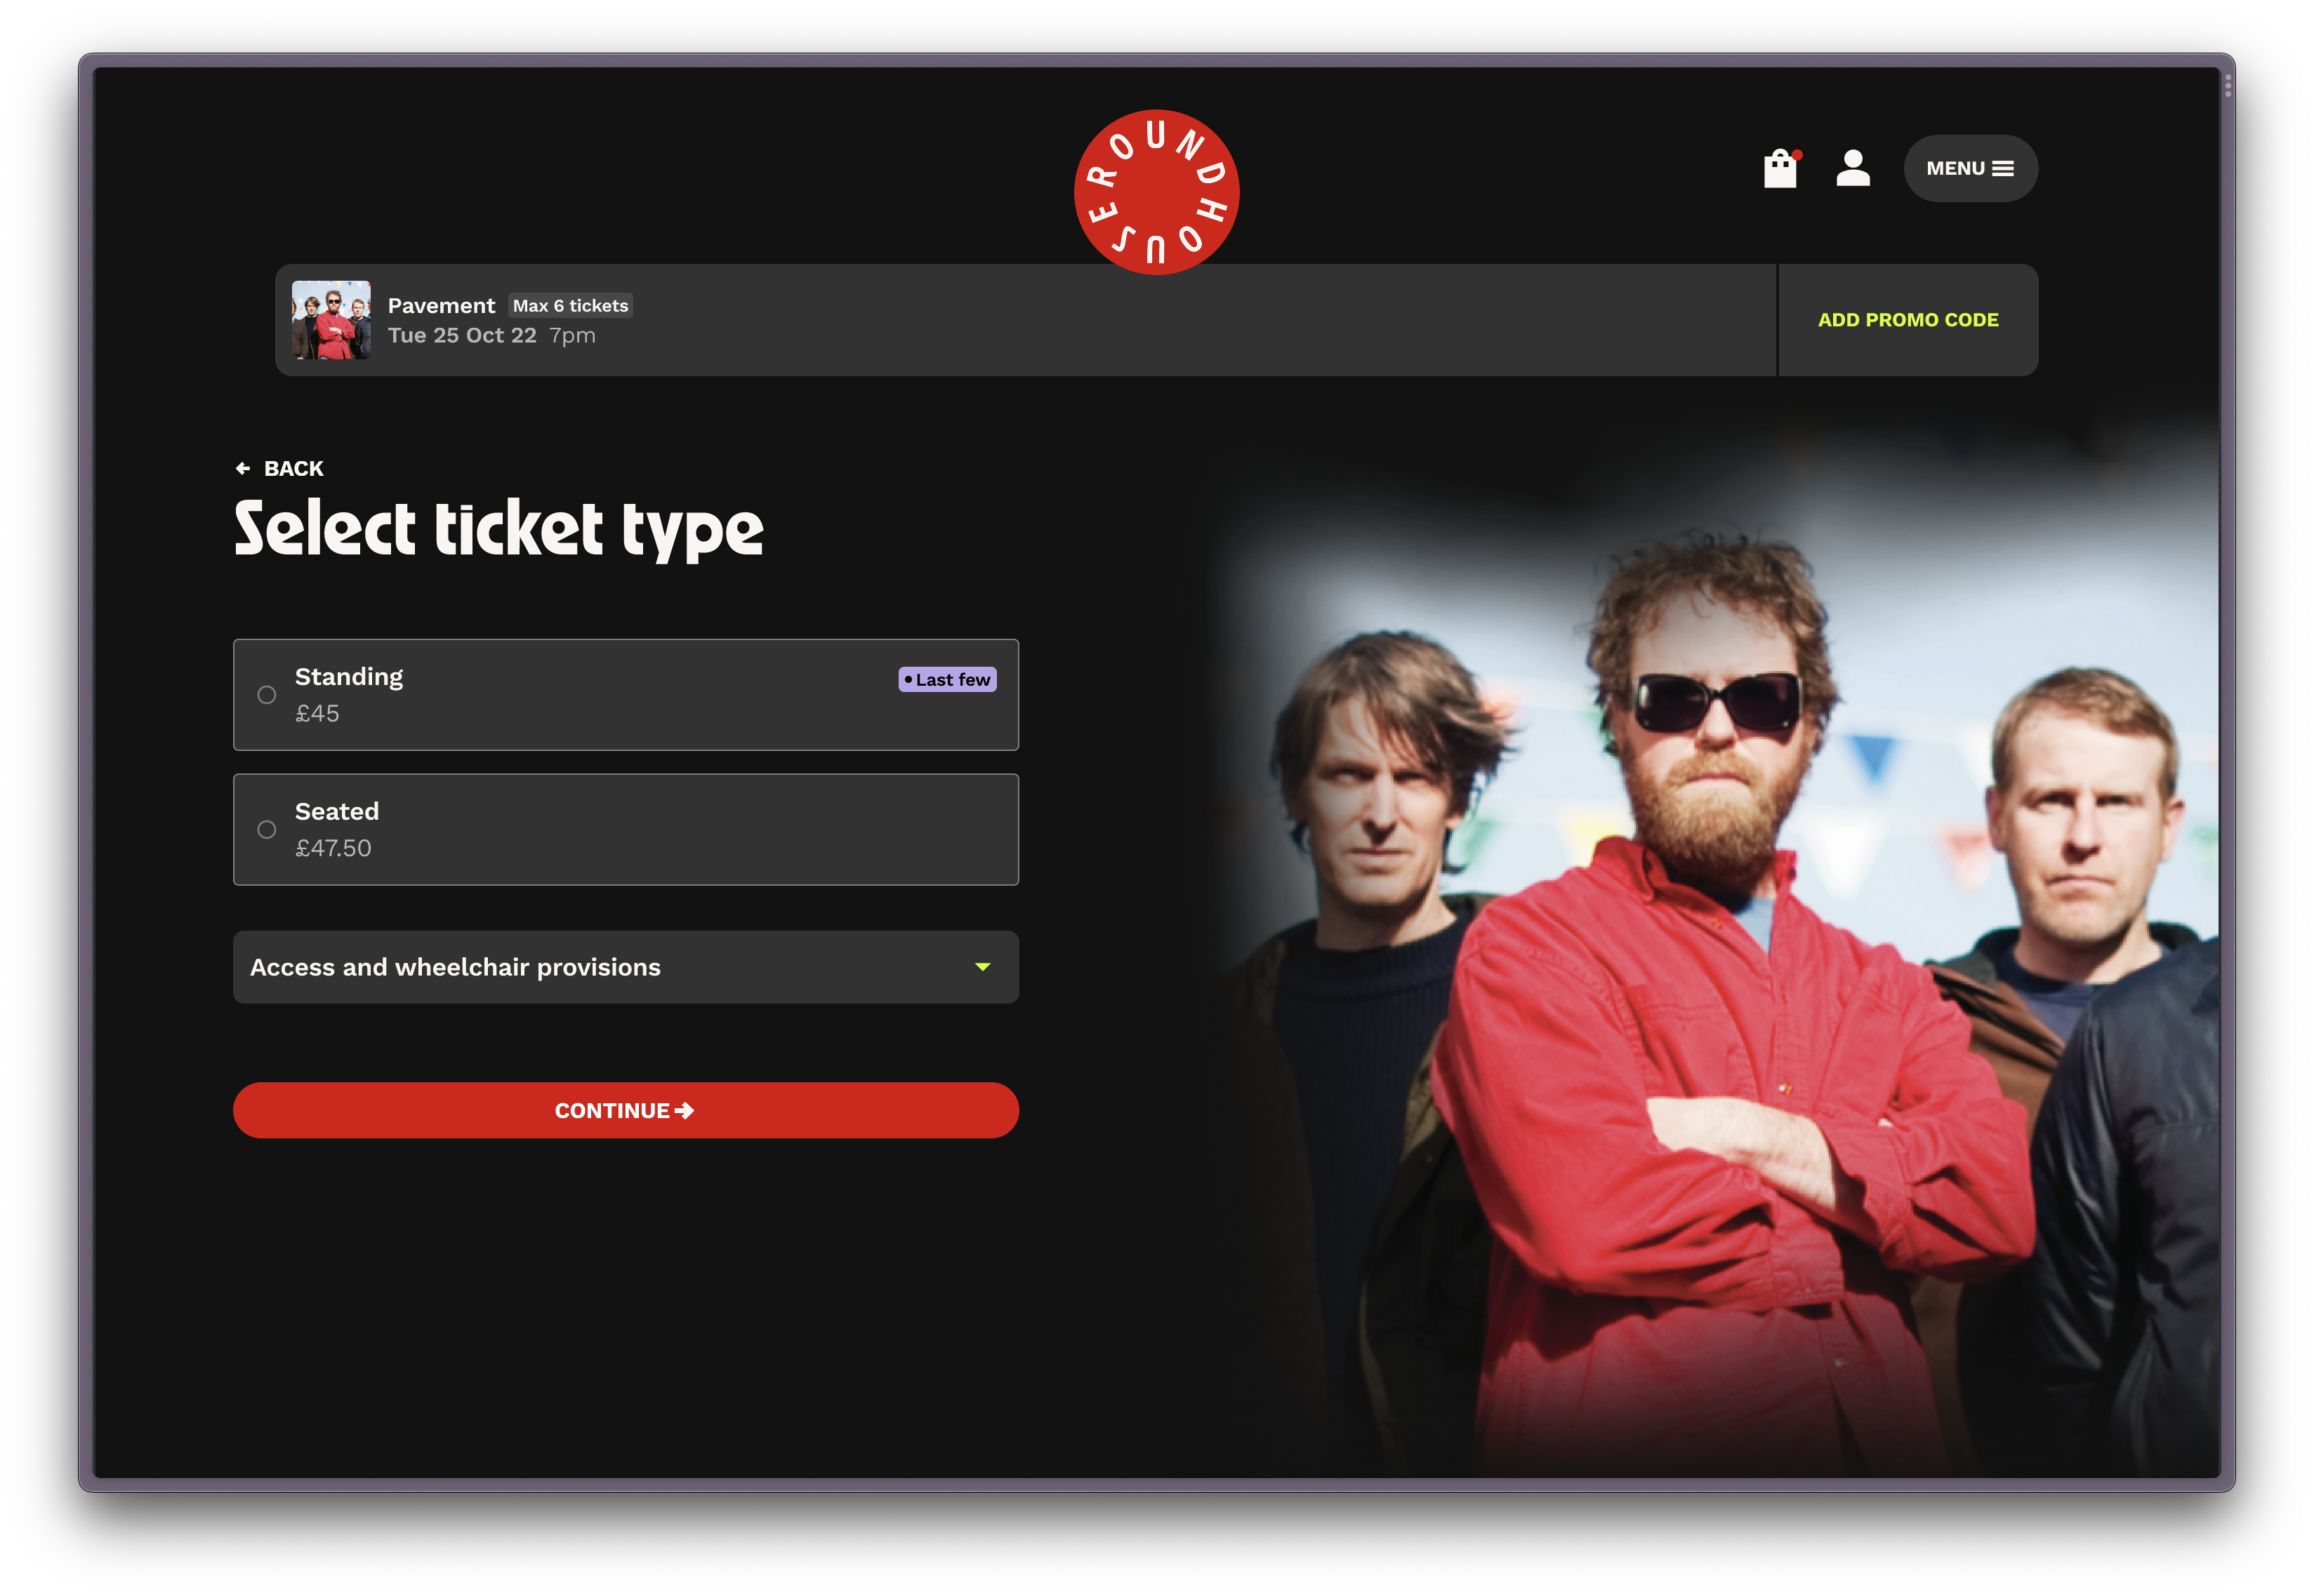 Screenshot showing the 'Select Ticket Type' step of Roundhouse's purchase path. Users are asked to select one of two radio buttons, standing or seated.